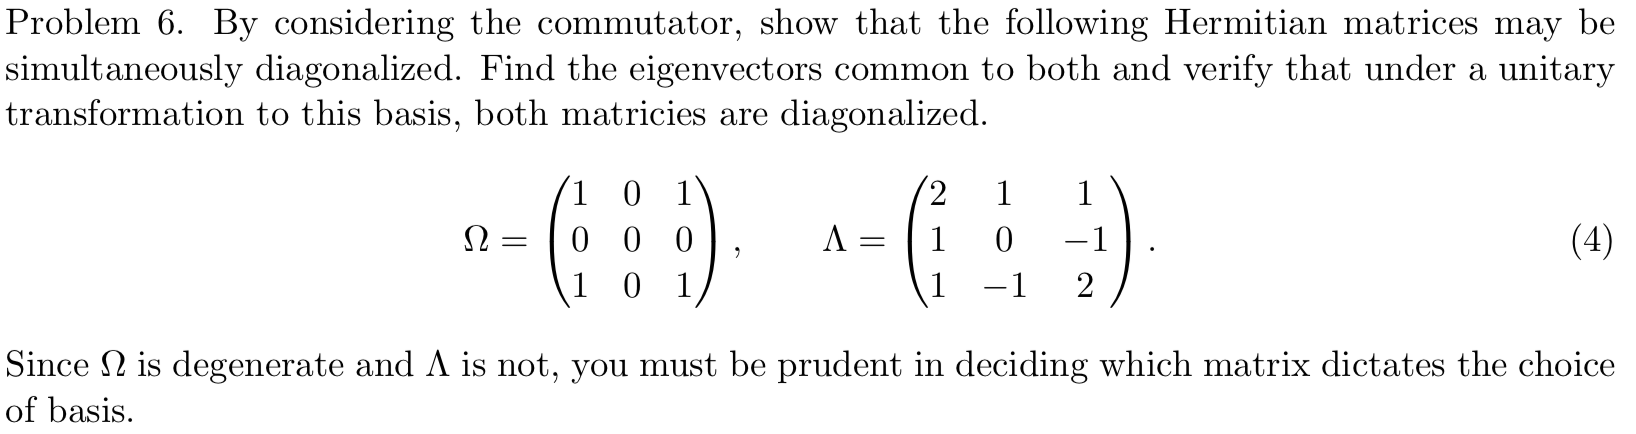 Problem 6 By considering the commutator, show that the following Hermitian matrices may be
|simultaneously diagonalized. Find the eigenvectors common to both and verify that under a unitary
transformation to this basis, both matricies are
diagonalized
2
1 0 1
1
1
(4)
0 0 0
1
-1
2
1 0 1
-1
Since is degenerate and A is not, you must be prudent in deciding which matrix dictates the choice
of basis
